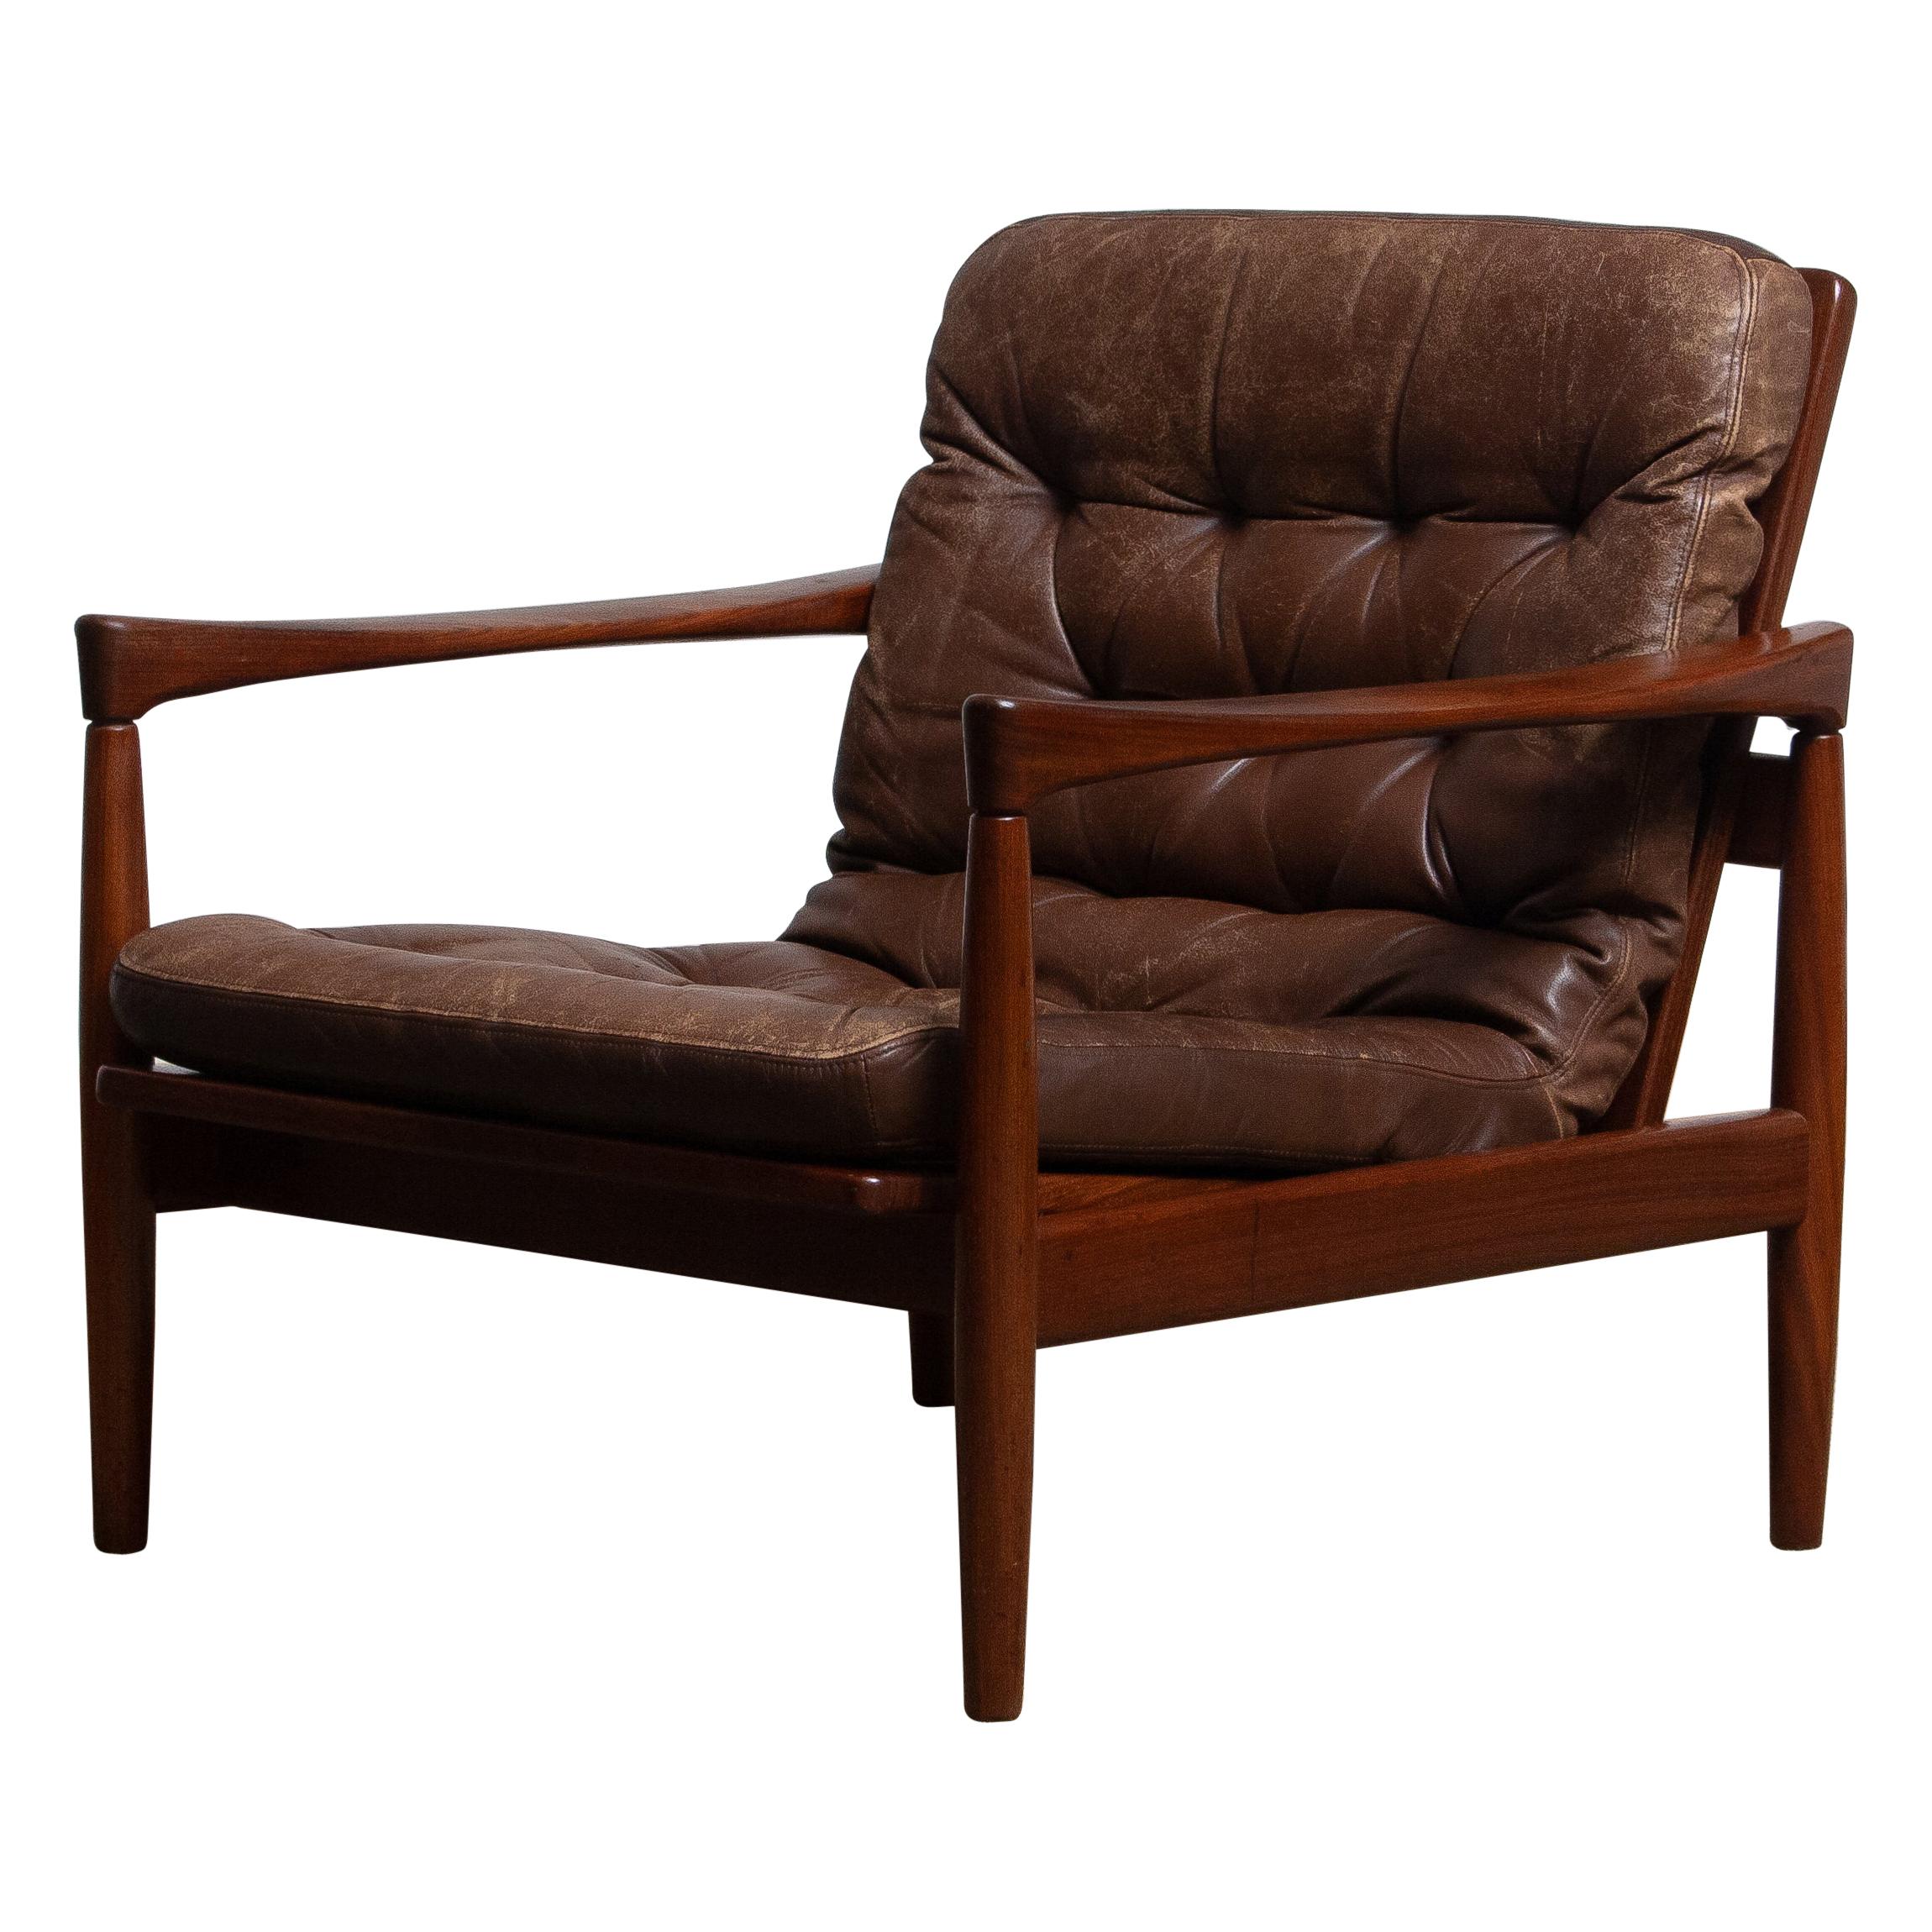 Swedish 1960s, Teak and Brown Leather Lounge Chair by Erik Wörtz for Bröderna Anderssons